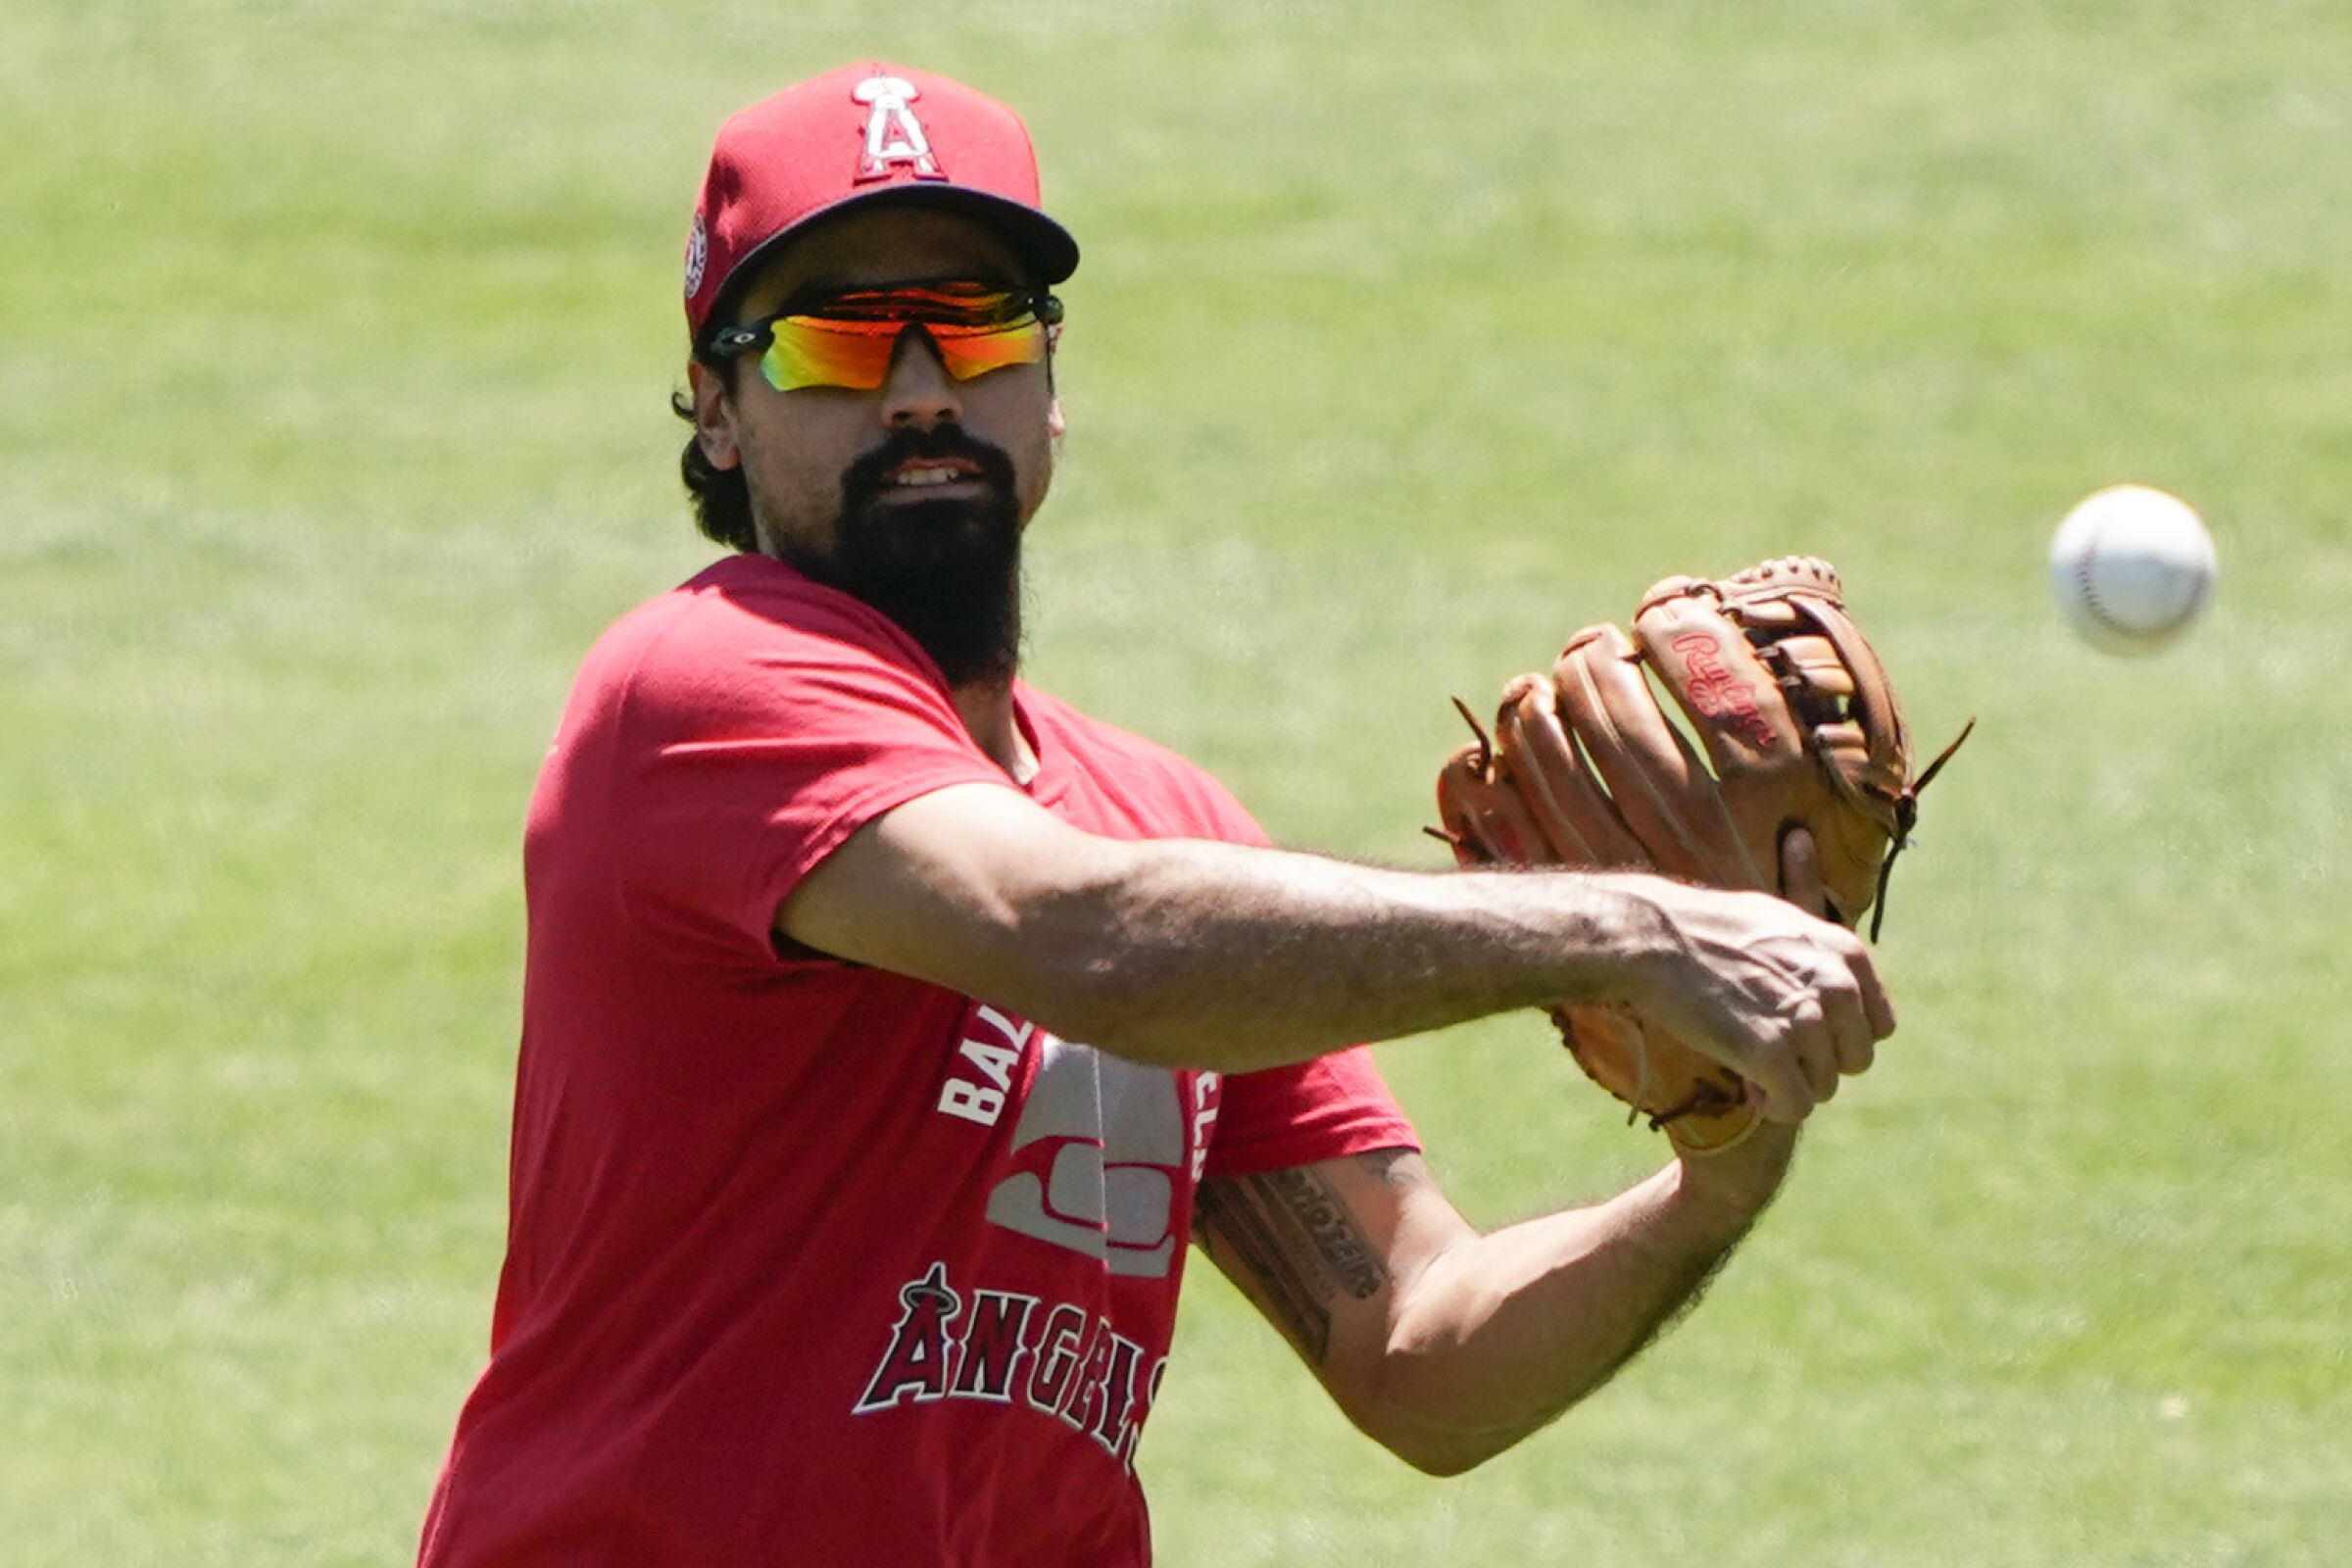 Los Angeles Angels third baseman Anthony Rendon throws during practice.